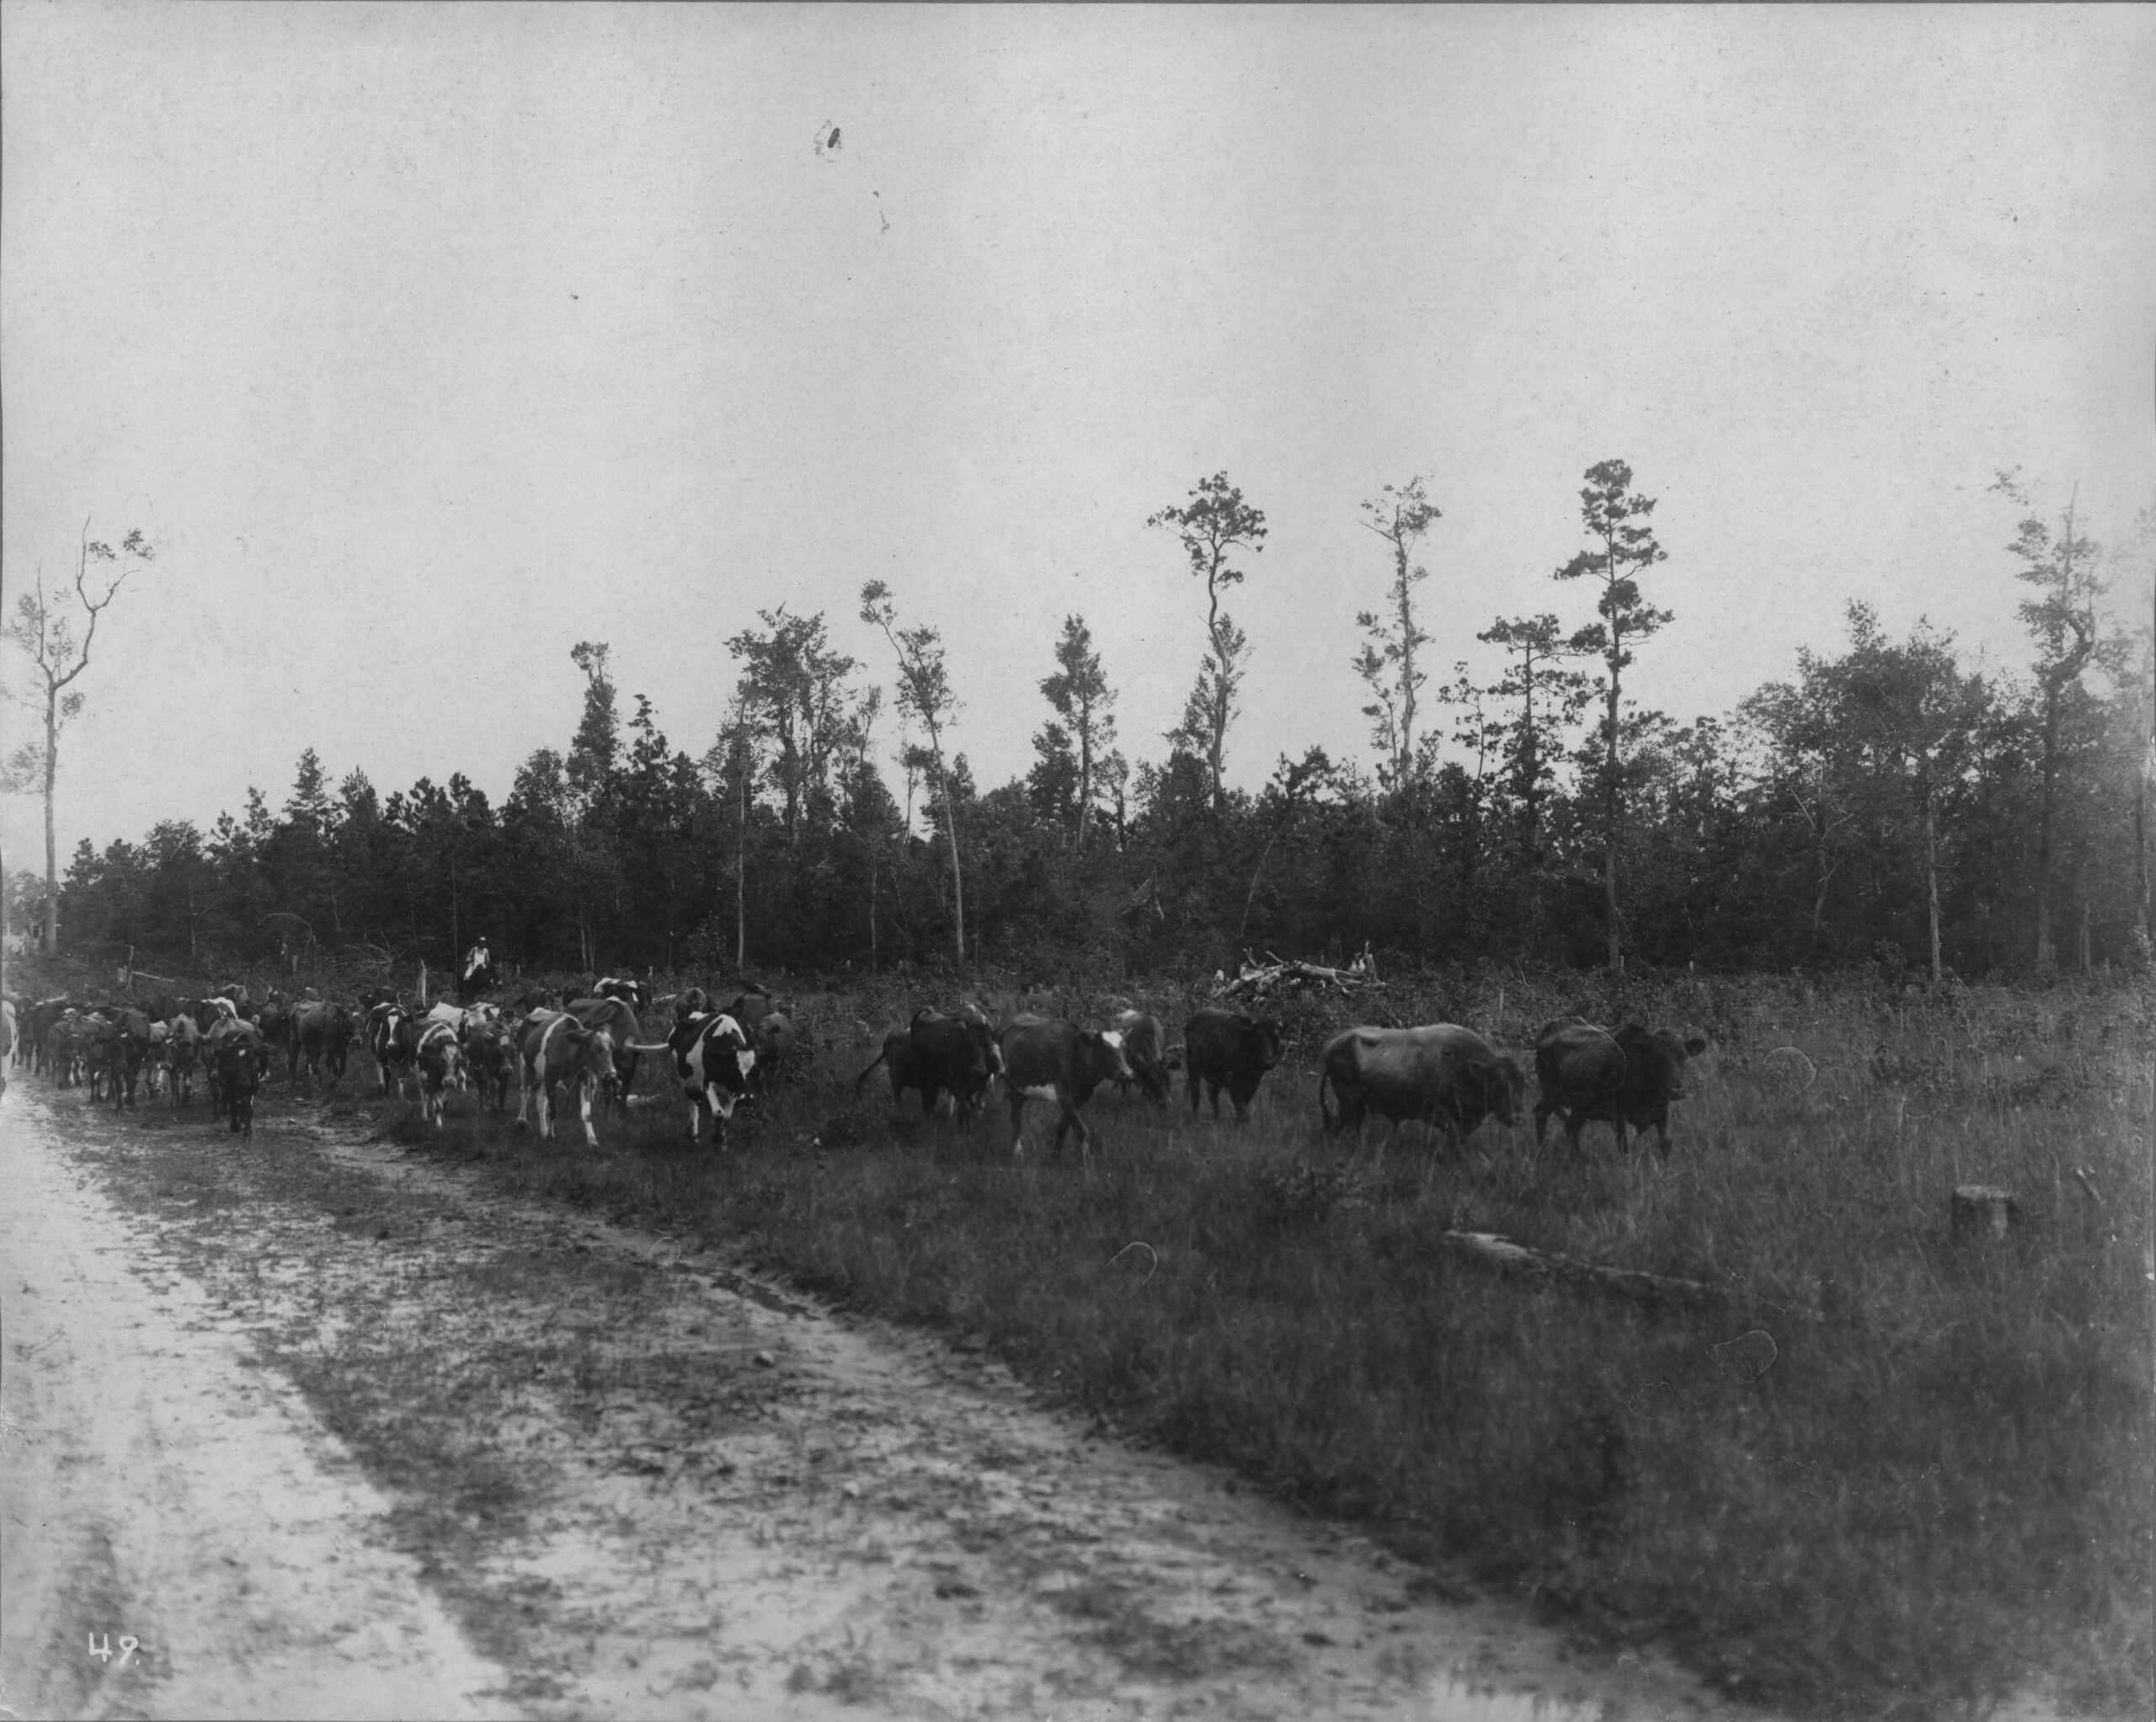 Emergence and Evolution of Carolina's Colonial Cattle Economy with Dr. Elizabeth J. Reitz